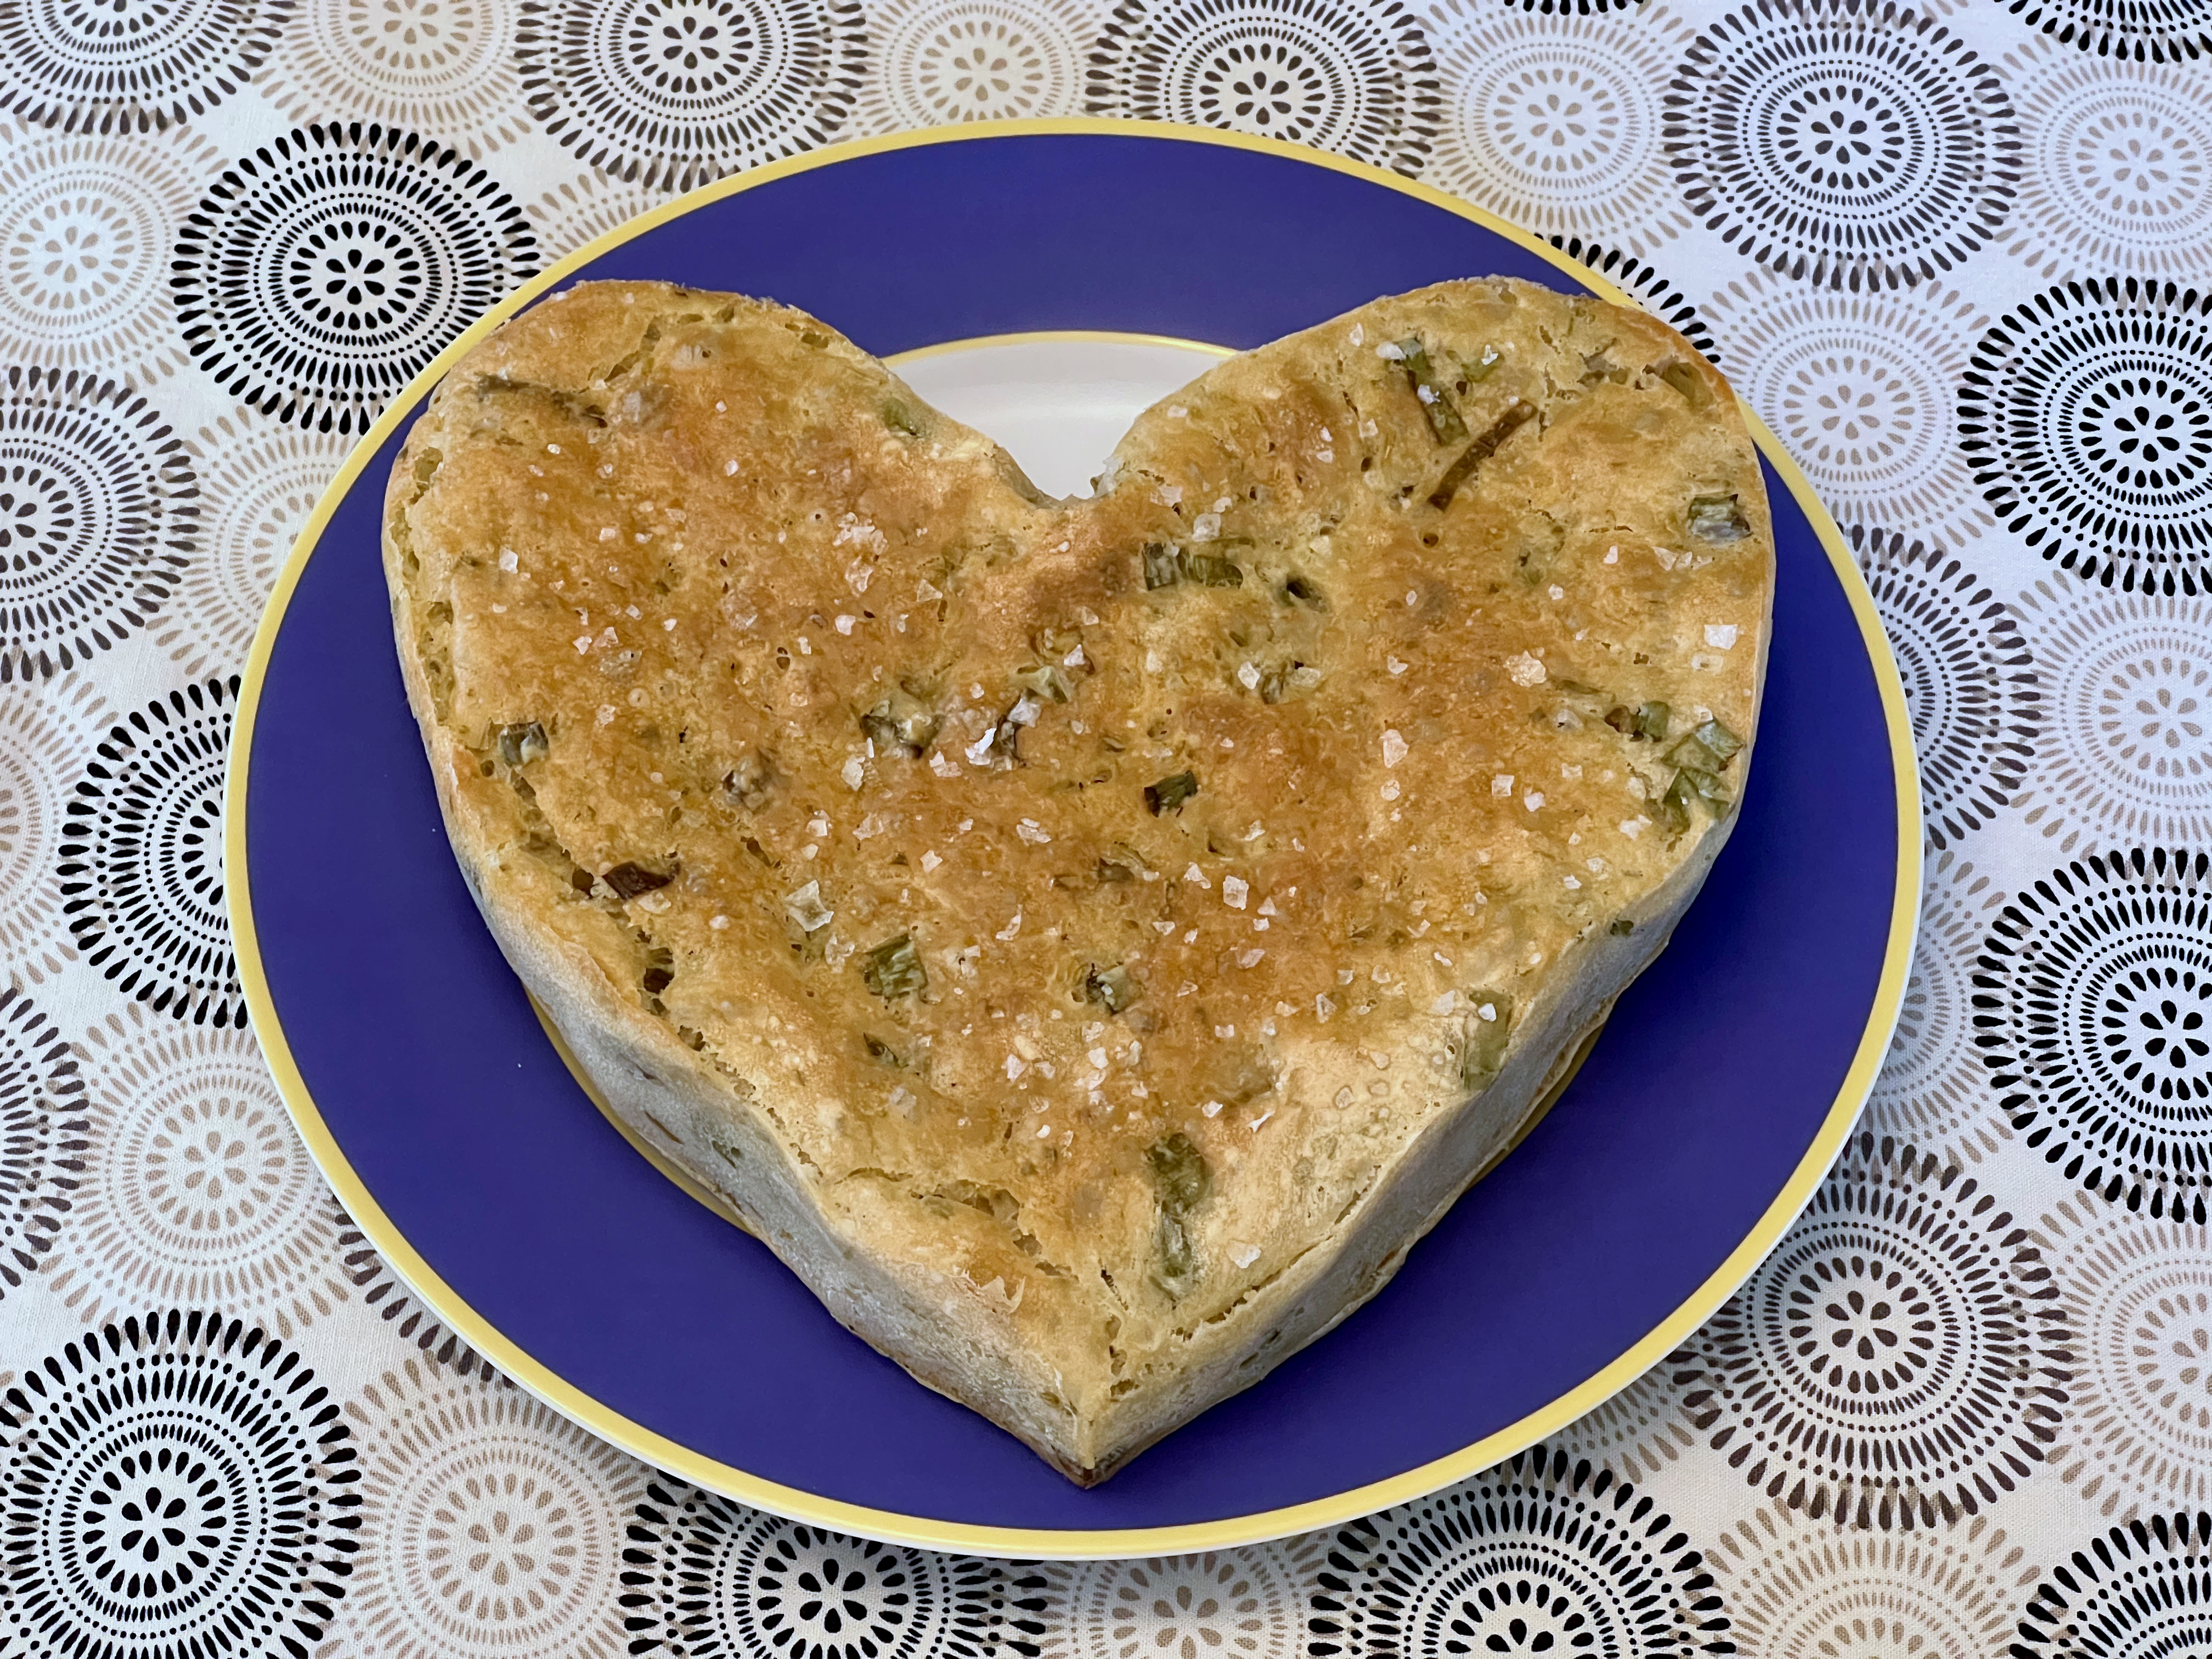 A flat, heart-shaped, golden-brown loaf of bread embedded with green herbs and sparkling with flakes of salt.